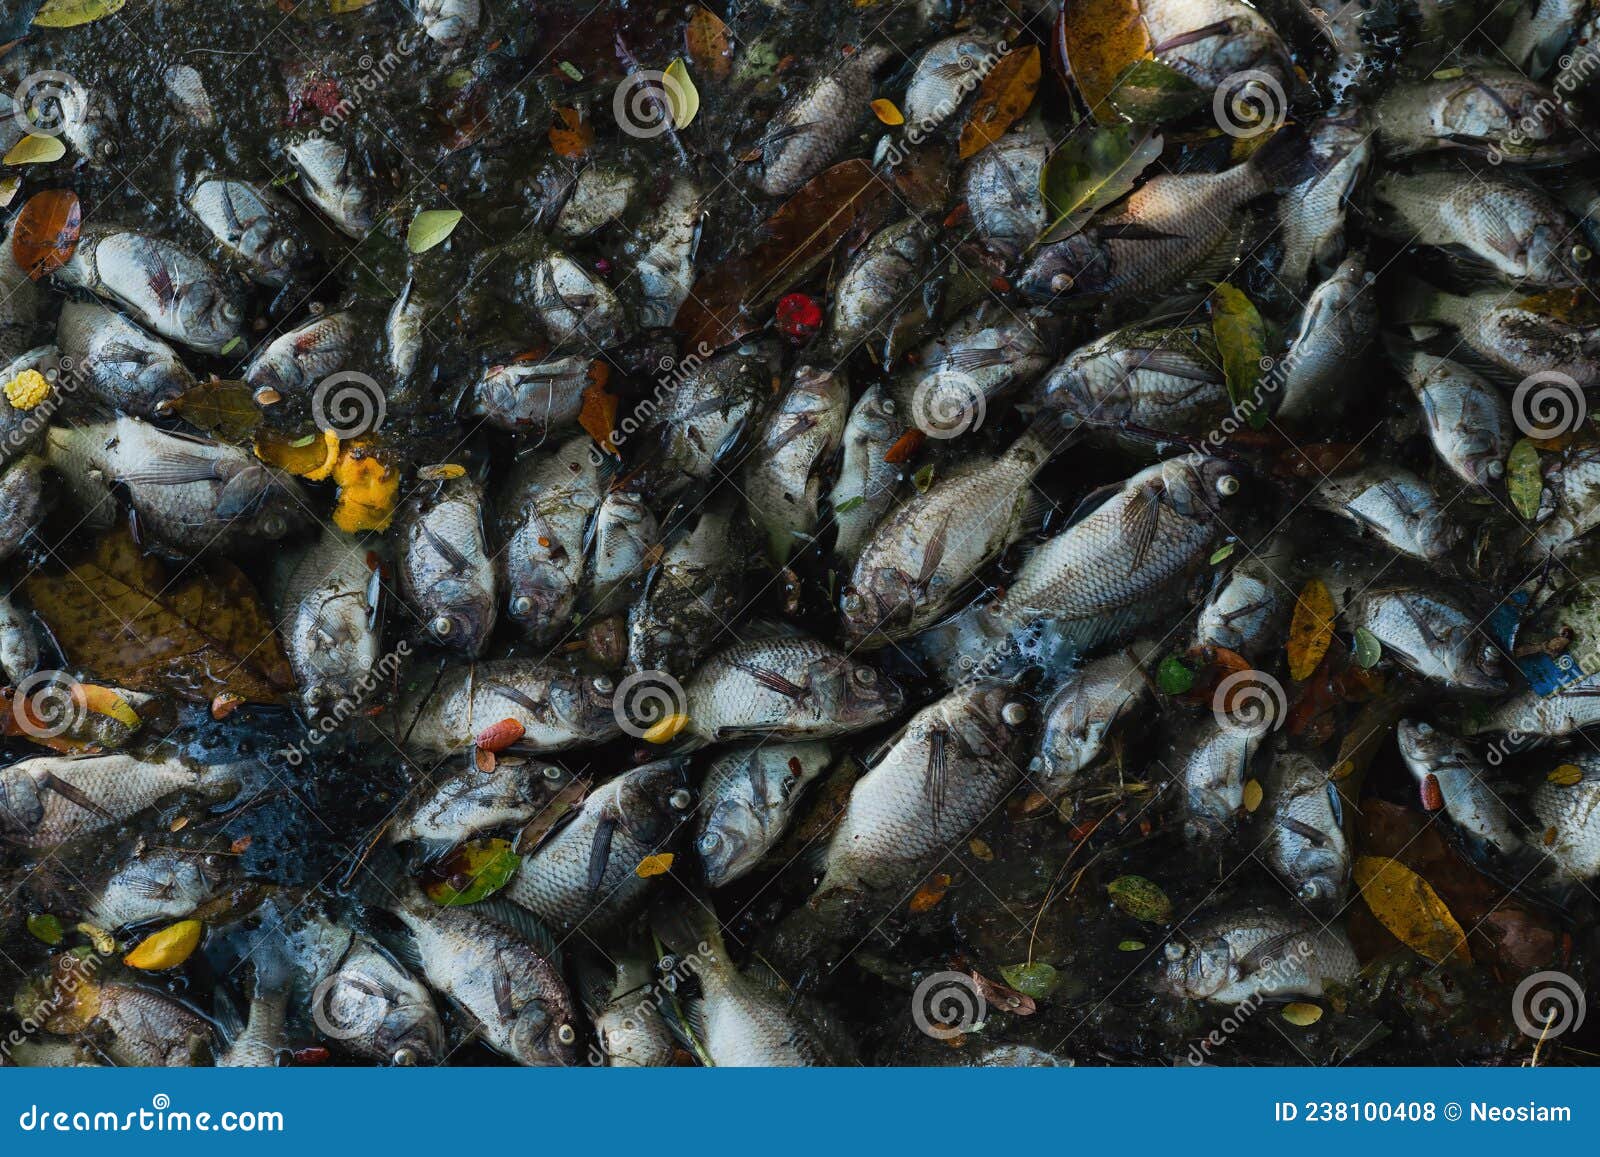 Dead fish on the river. stock photo. Image of environment - 238100408